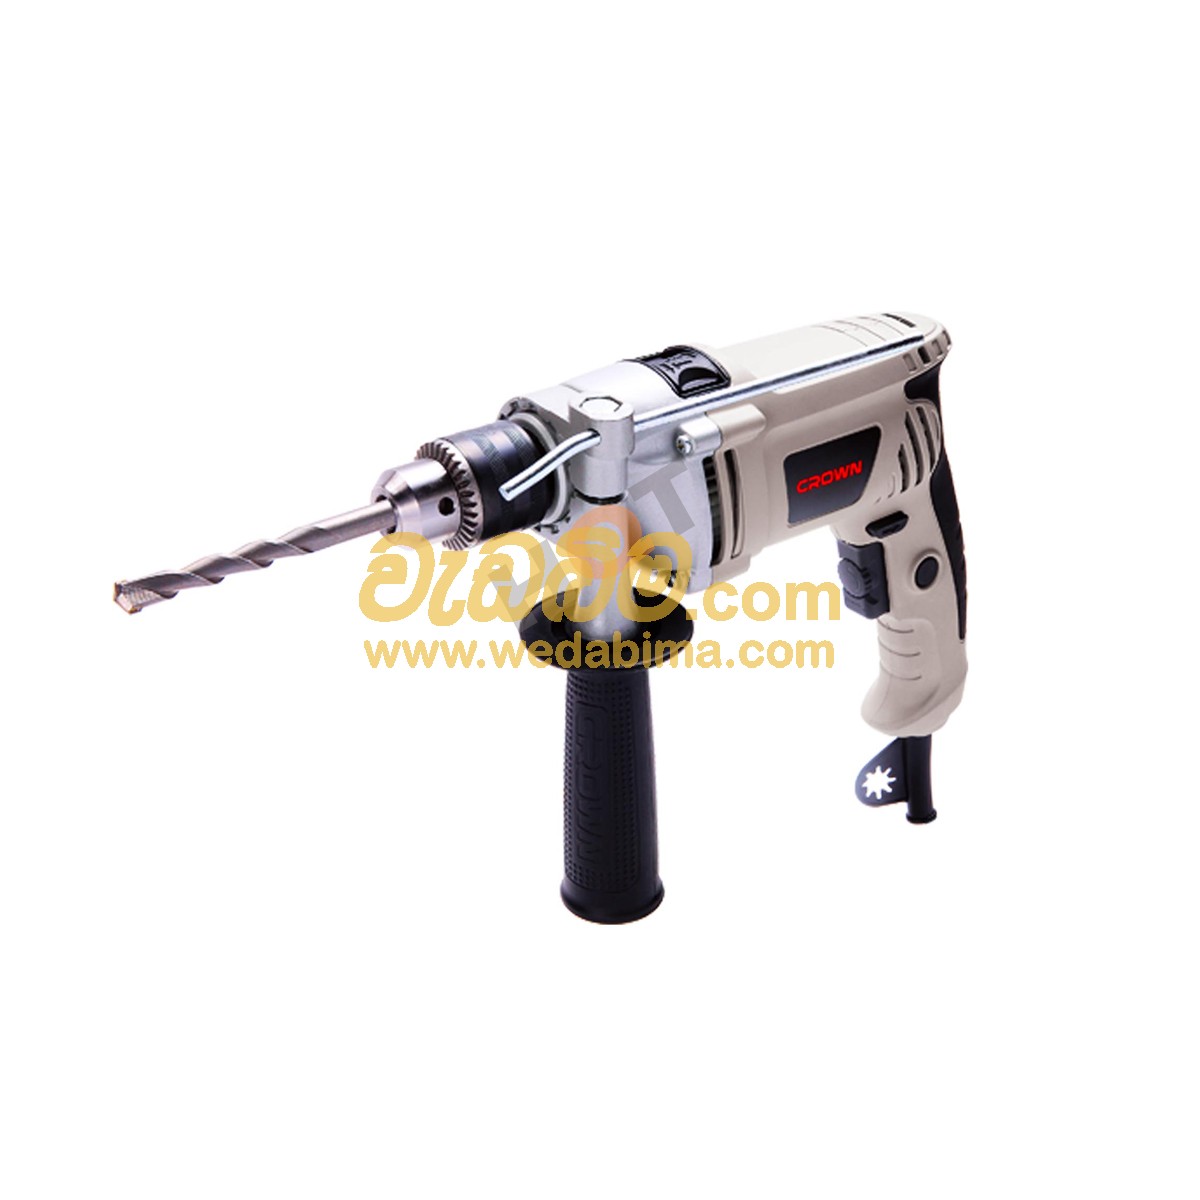 Cover image for CROWN Impact Drill 810W